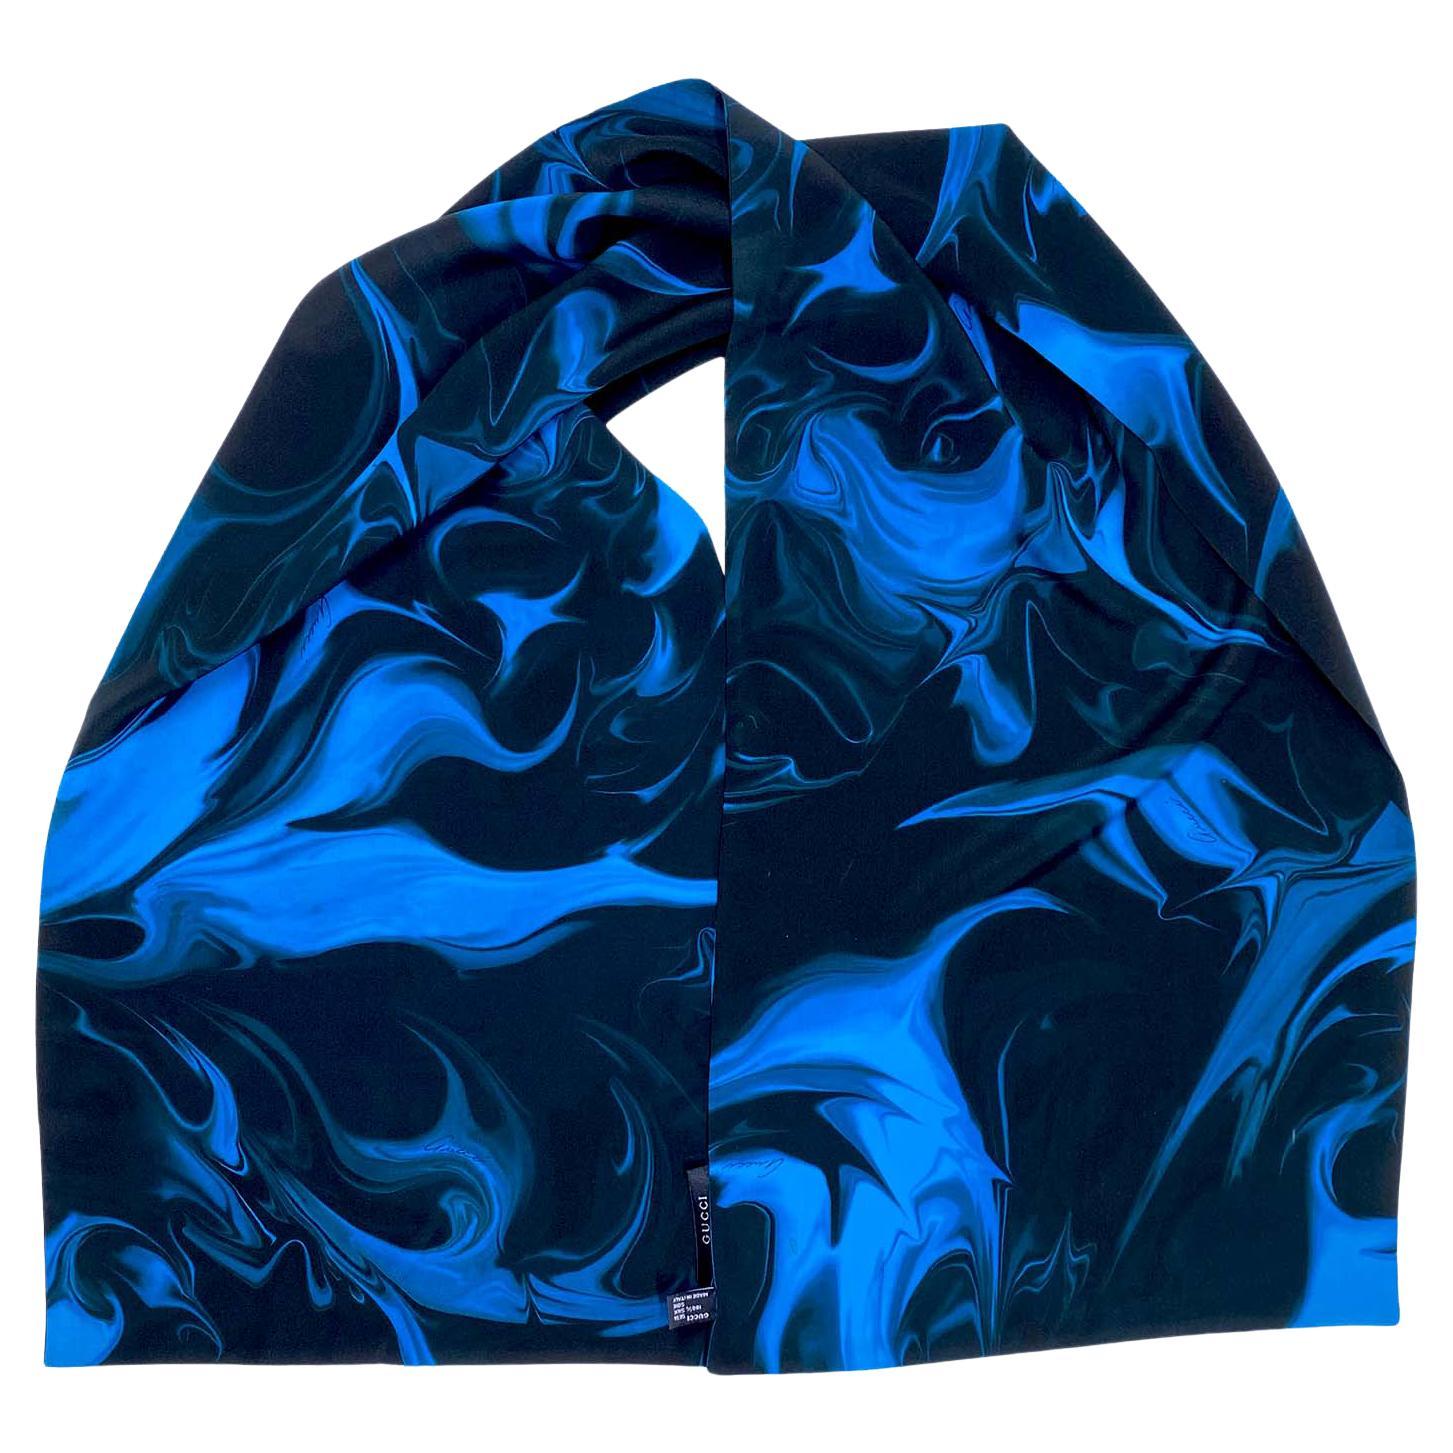 S/S 2001 Gucci by Tom Ford Lava Print Blue Silk Scarf